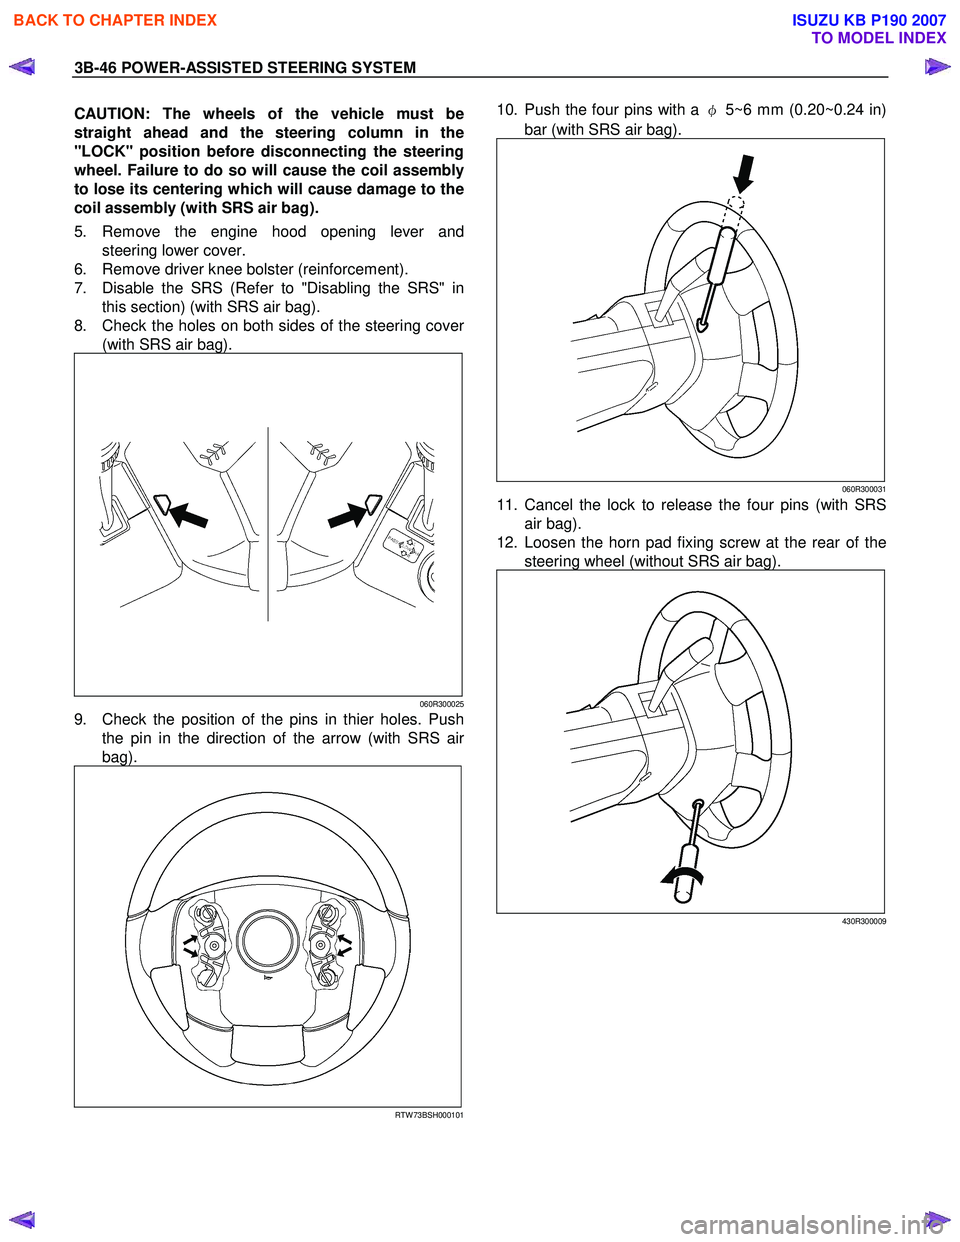 ISUZU KB P190 2007  Workshop Repair Manual 3B-46 POWER-ASSISTED STEERING SYSTEM 
CAUTION: The wheels of the vehicle must be  
straight ahead and the steering column in the
"LOCK" position before disconnecting the steering
wheel. Failure to do 